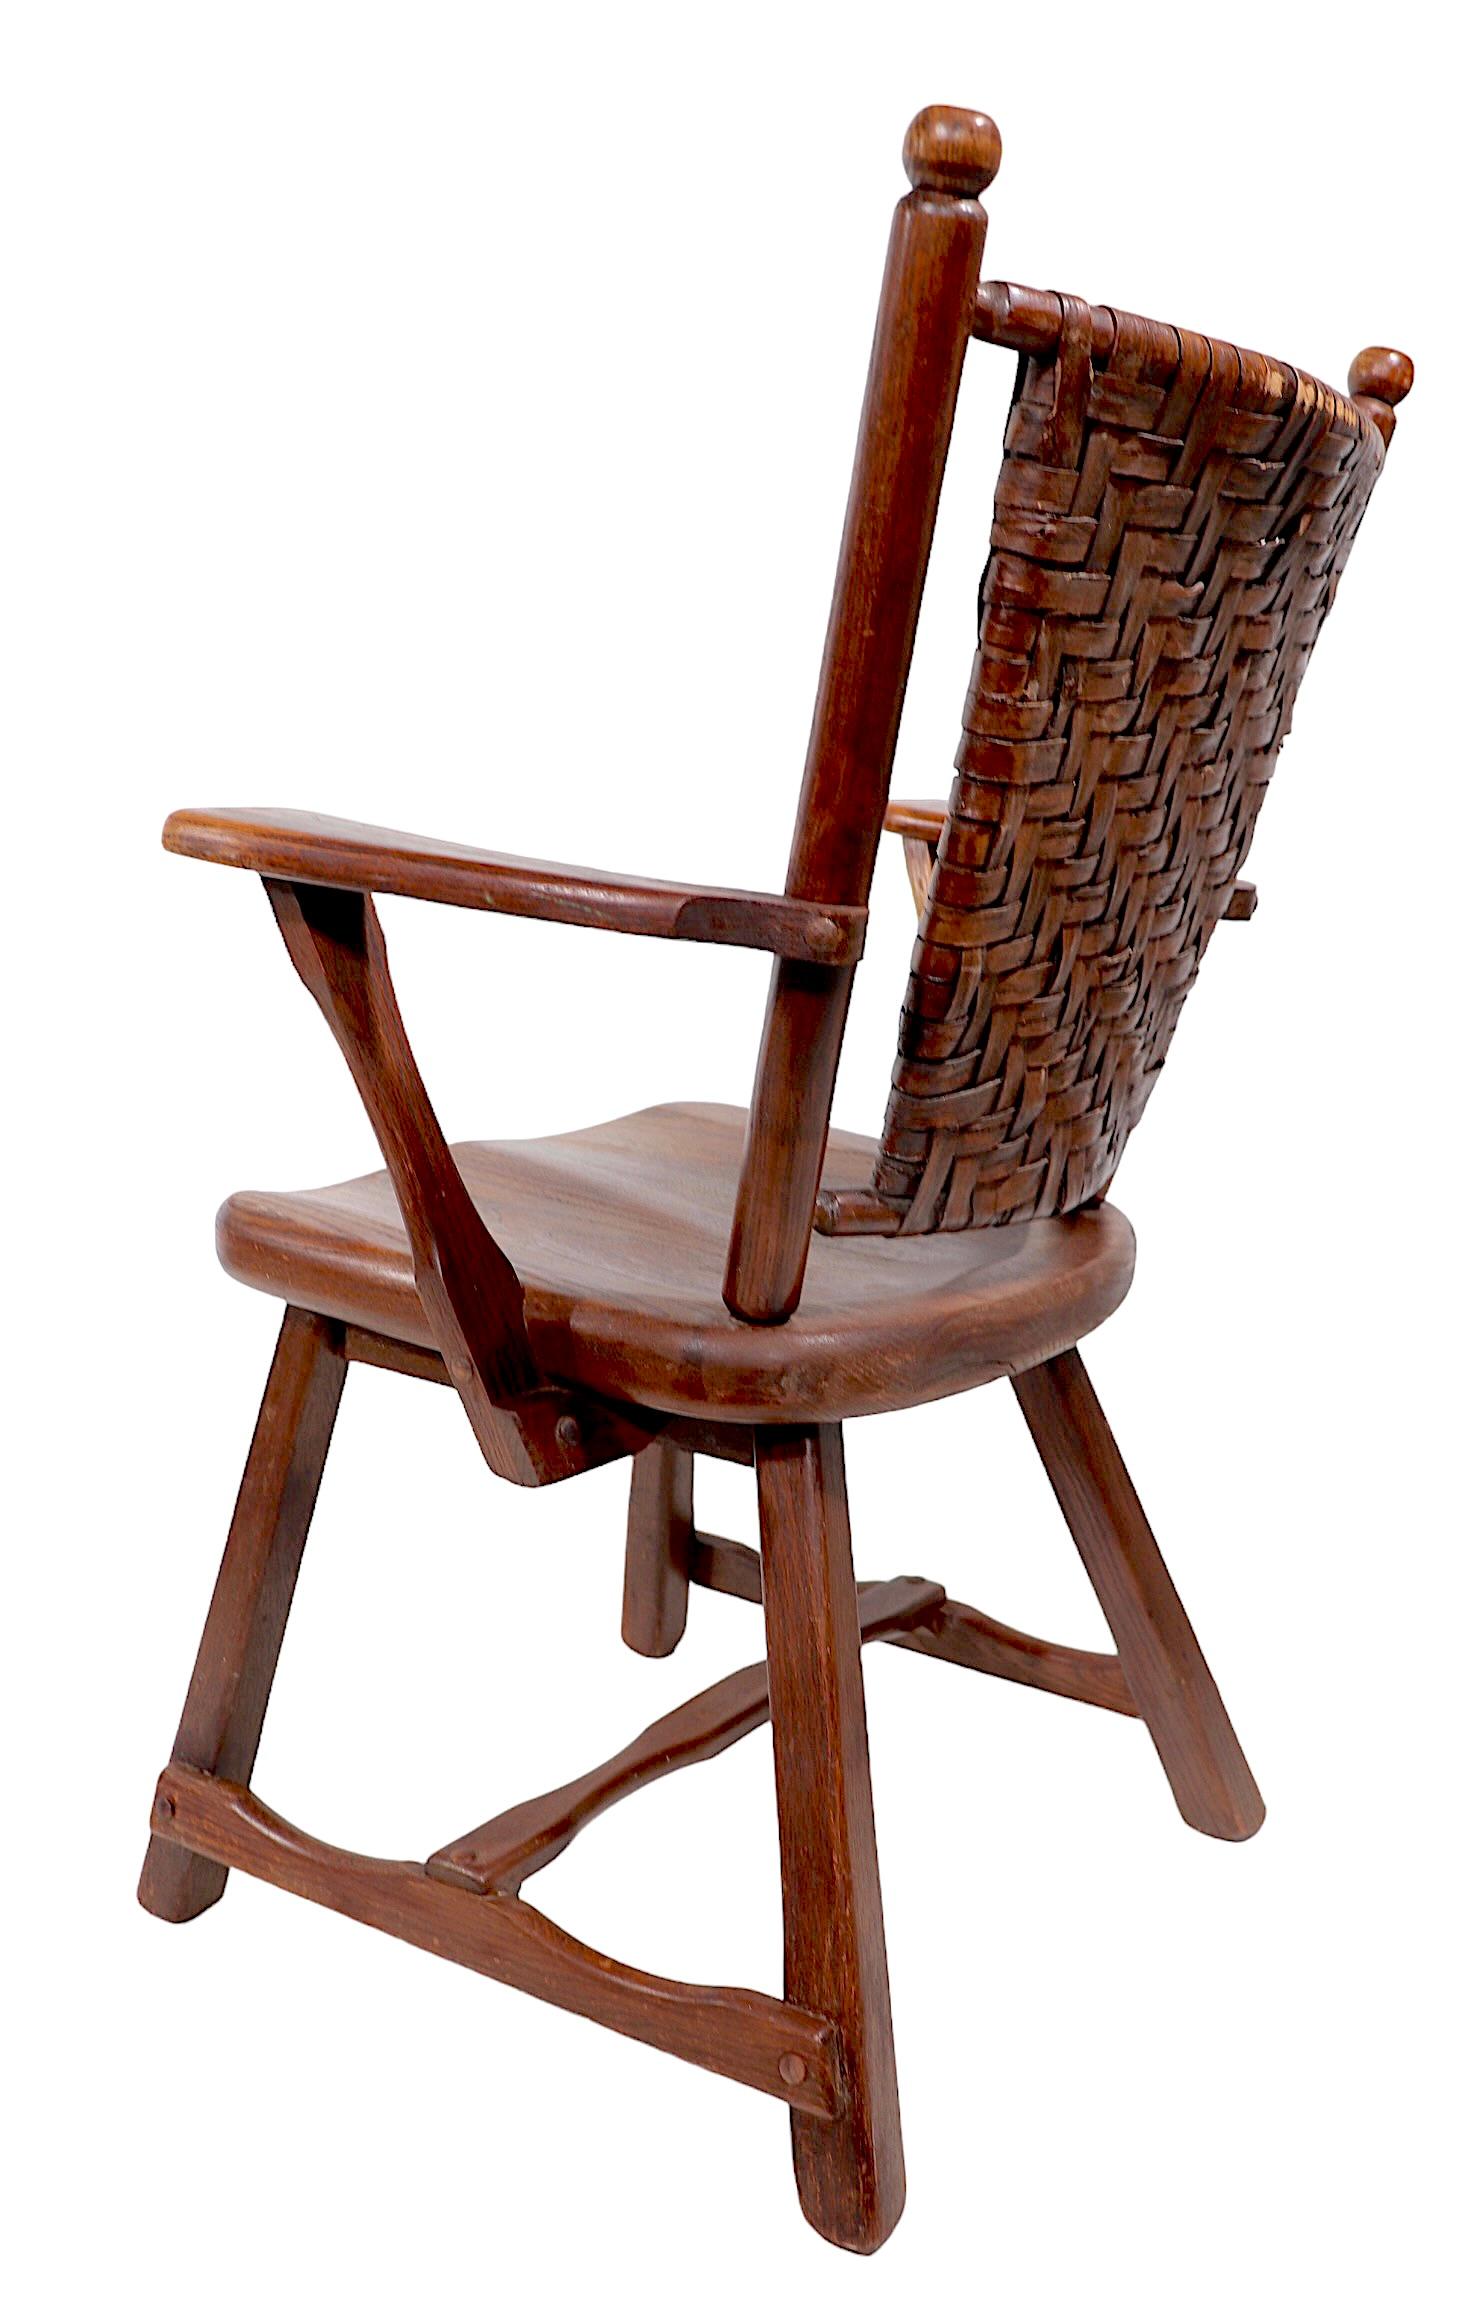 Rustic Old Hickory American Provincial Paddle Arm Lounge Chair c 1940's For Sale